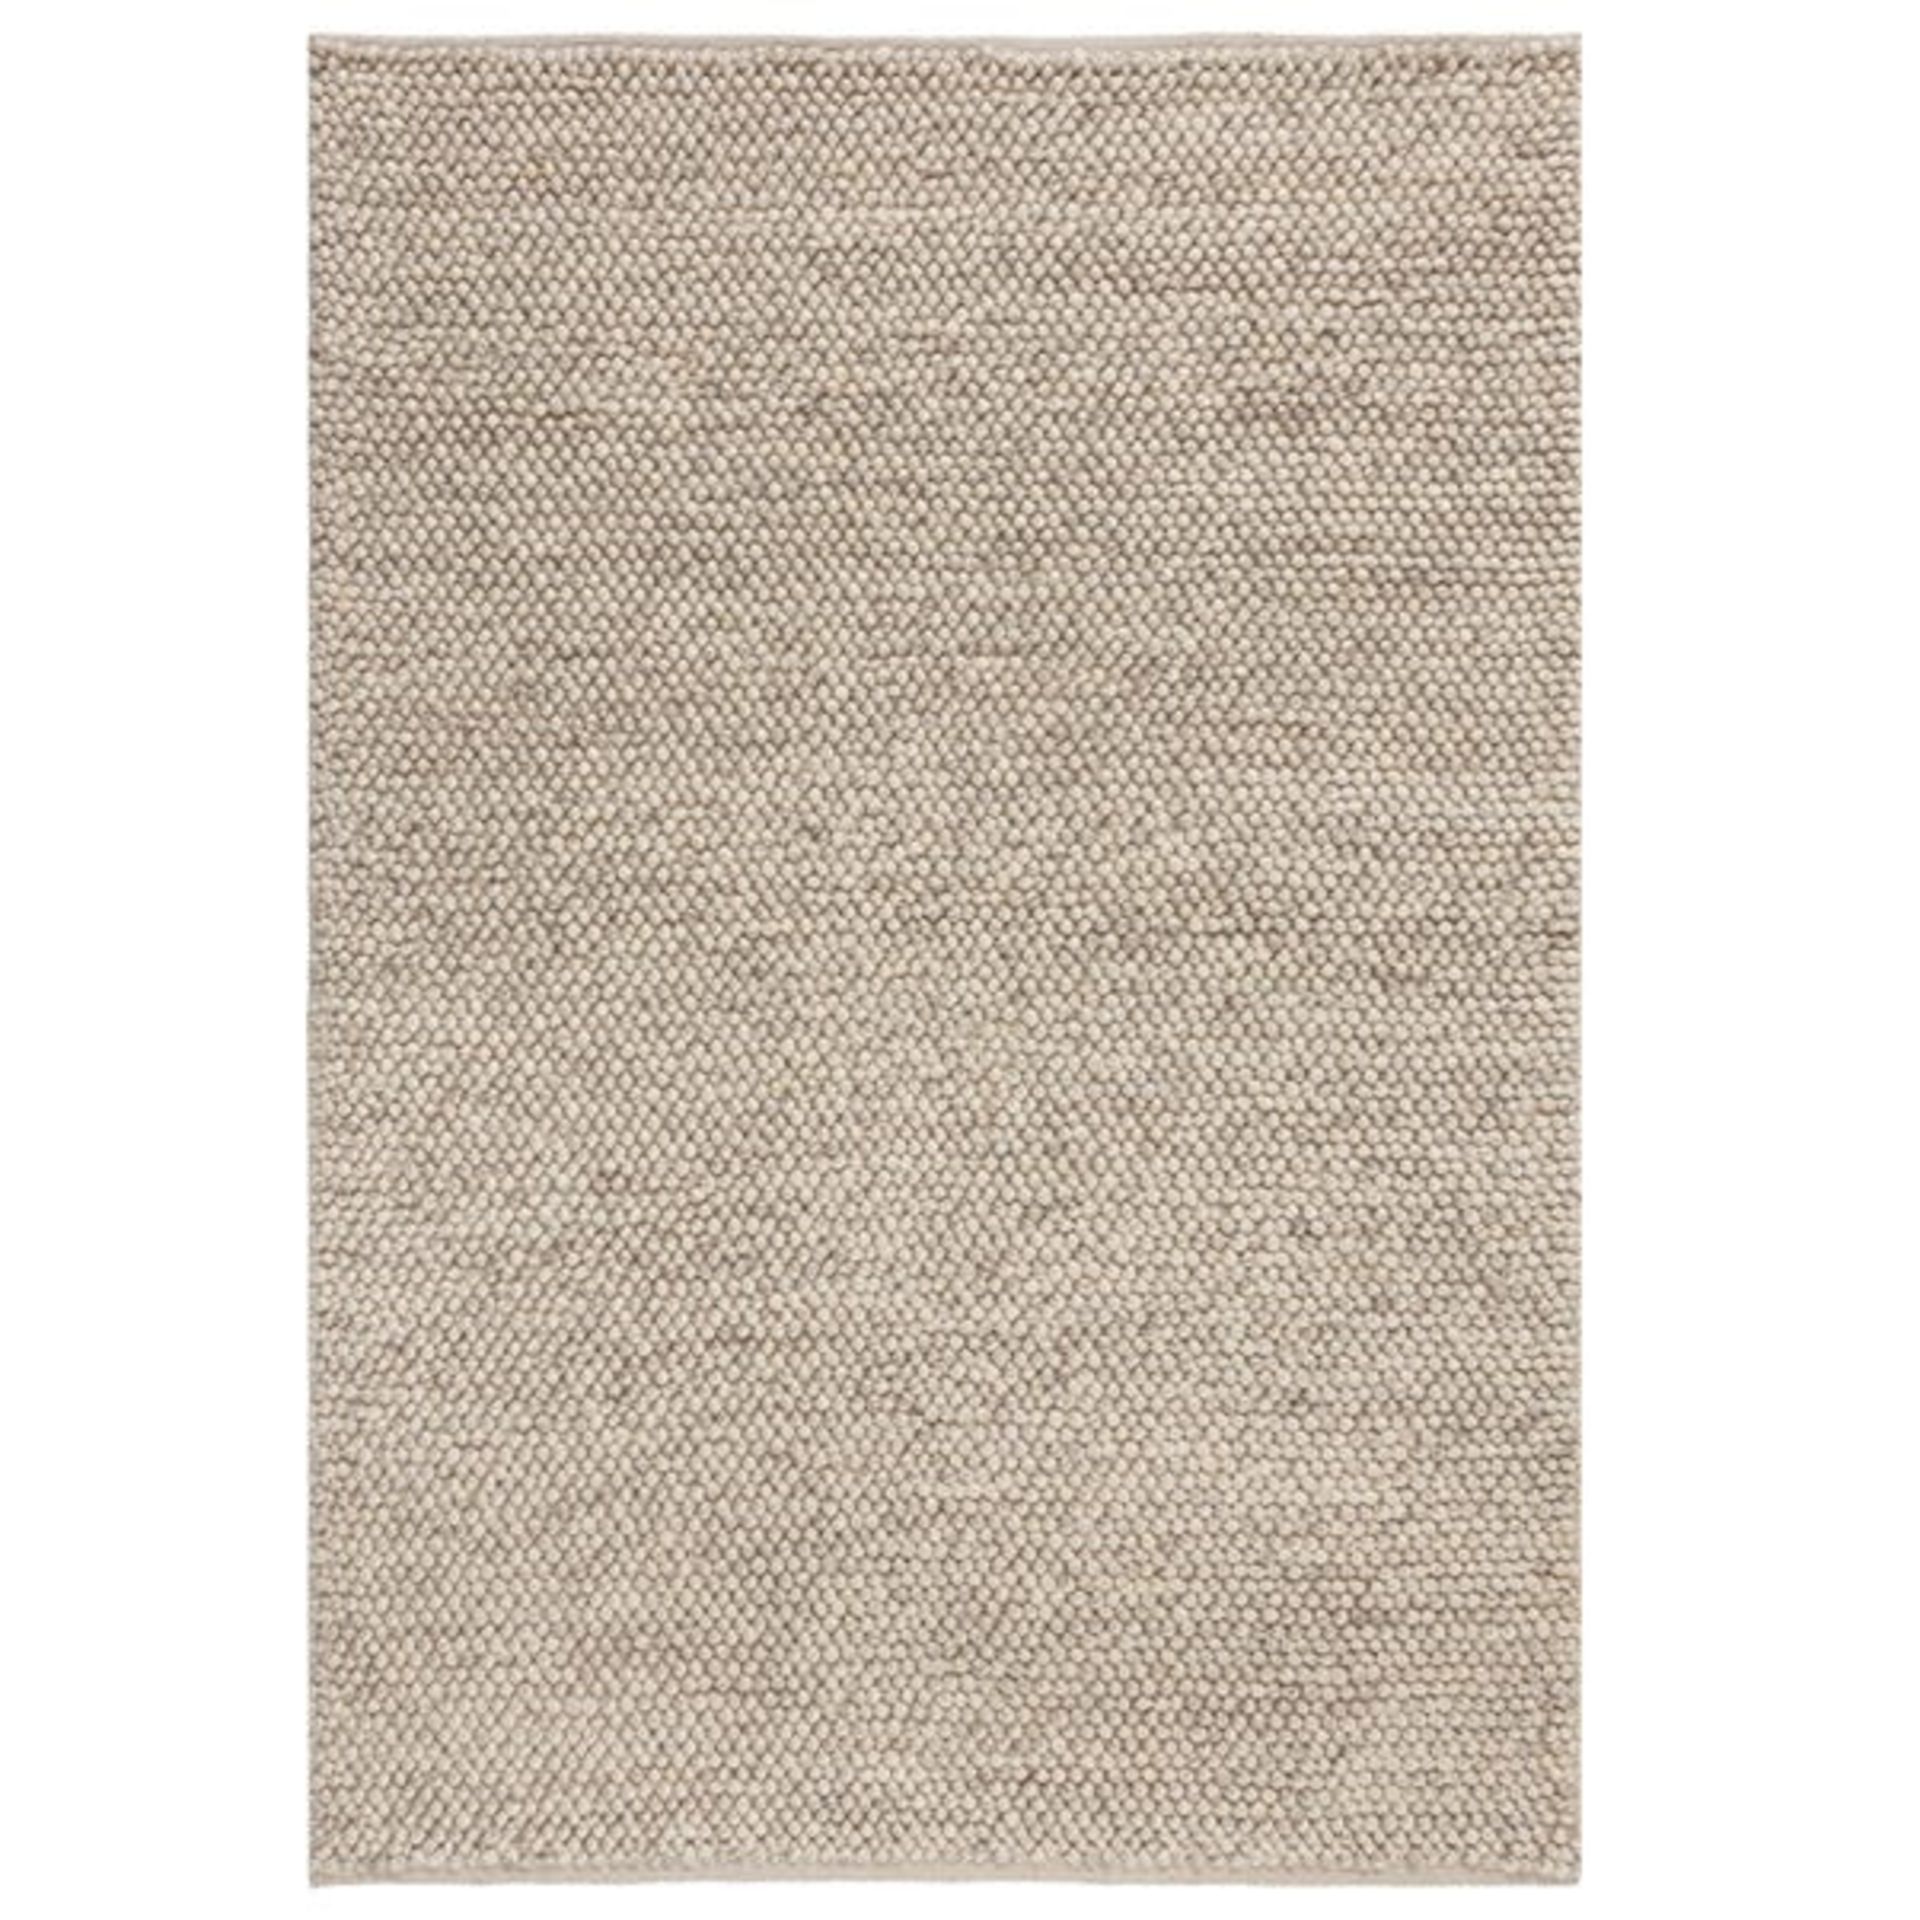 Minerals Rug Minerals Natural Rectangle 80X150cm RRP 99 About the Product(s) Minerals Rug Minerals - Image 2 of 3